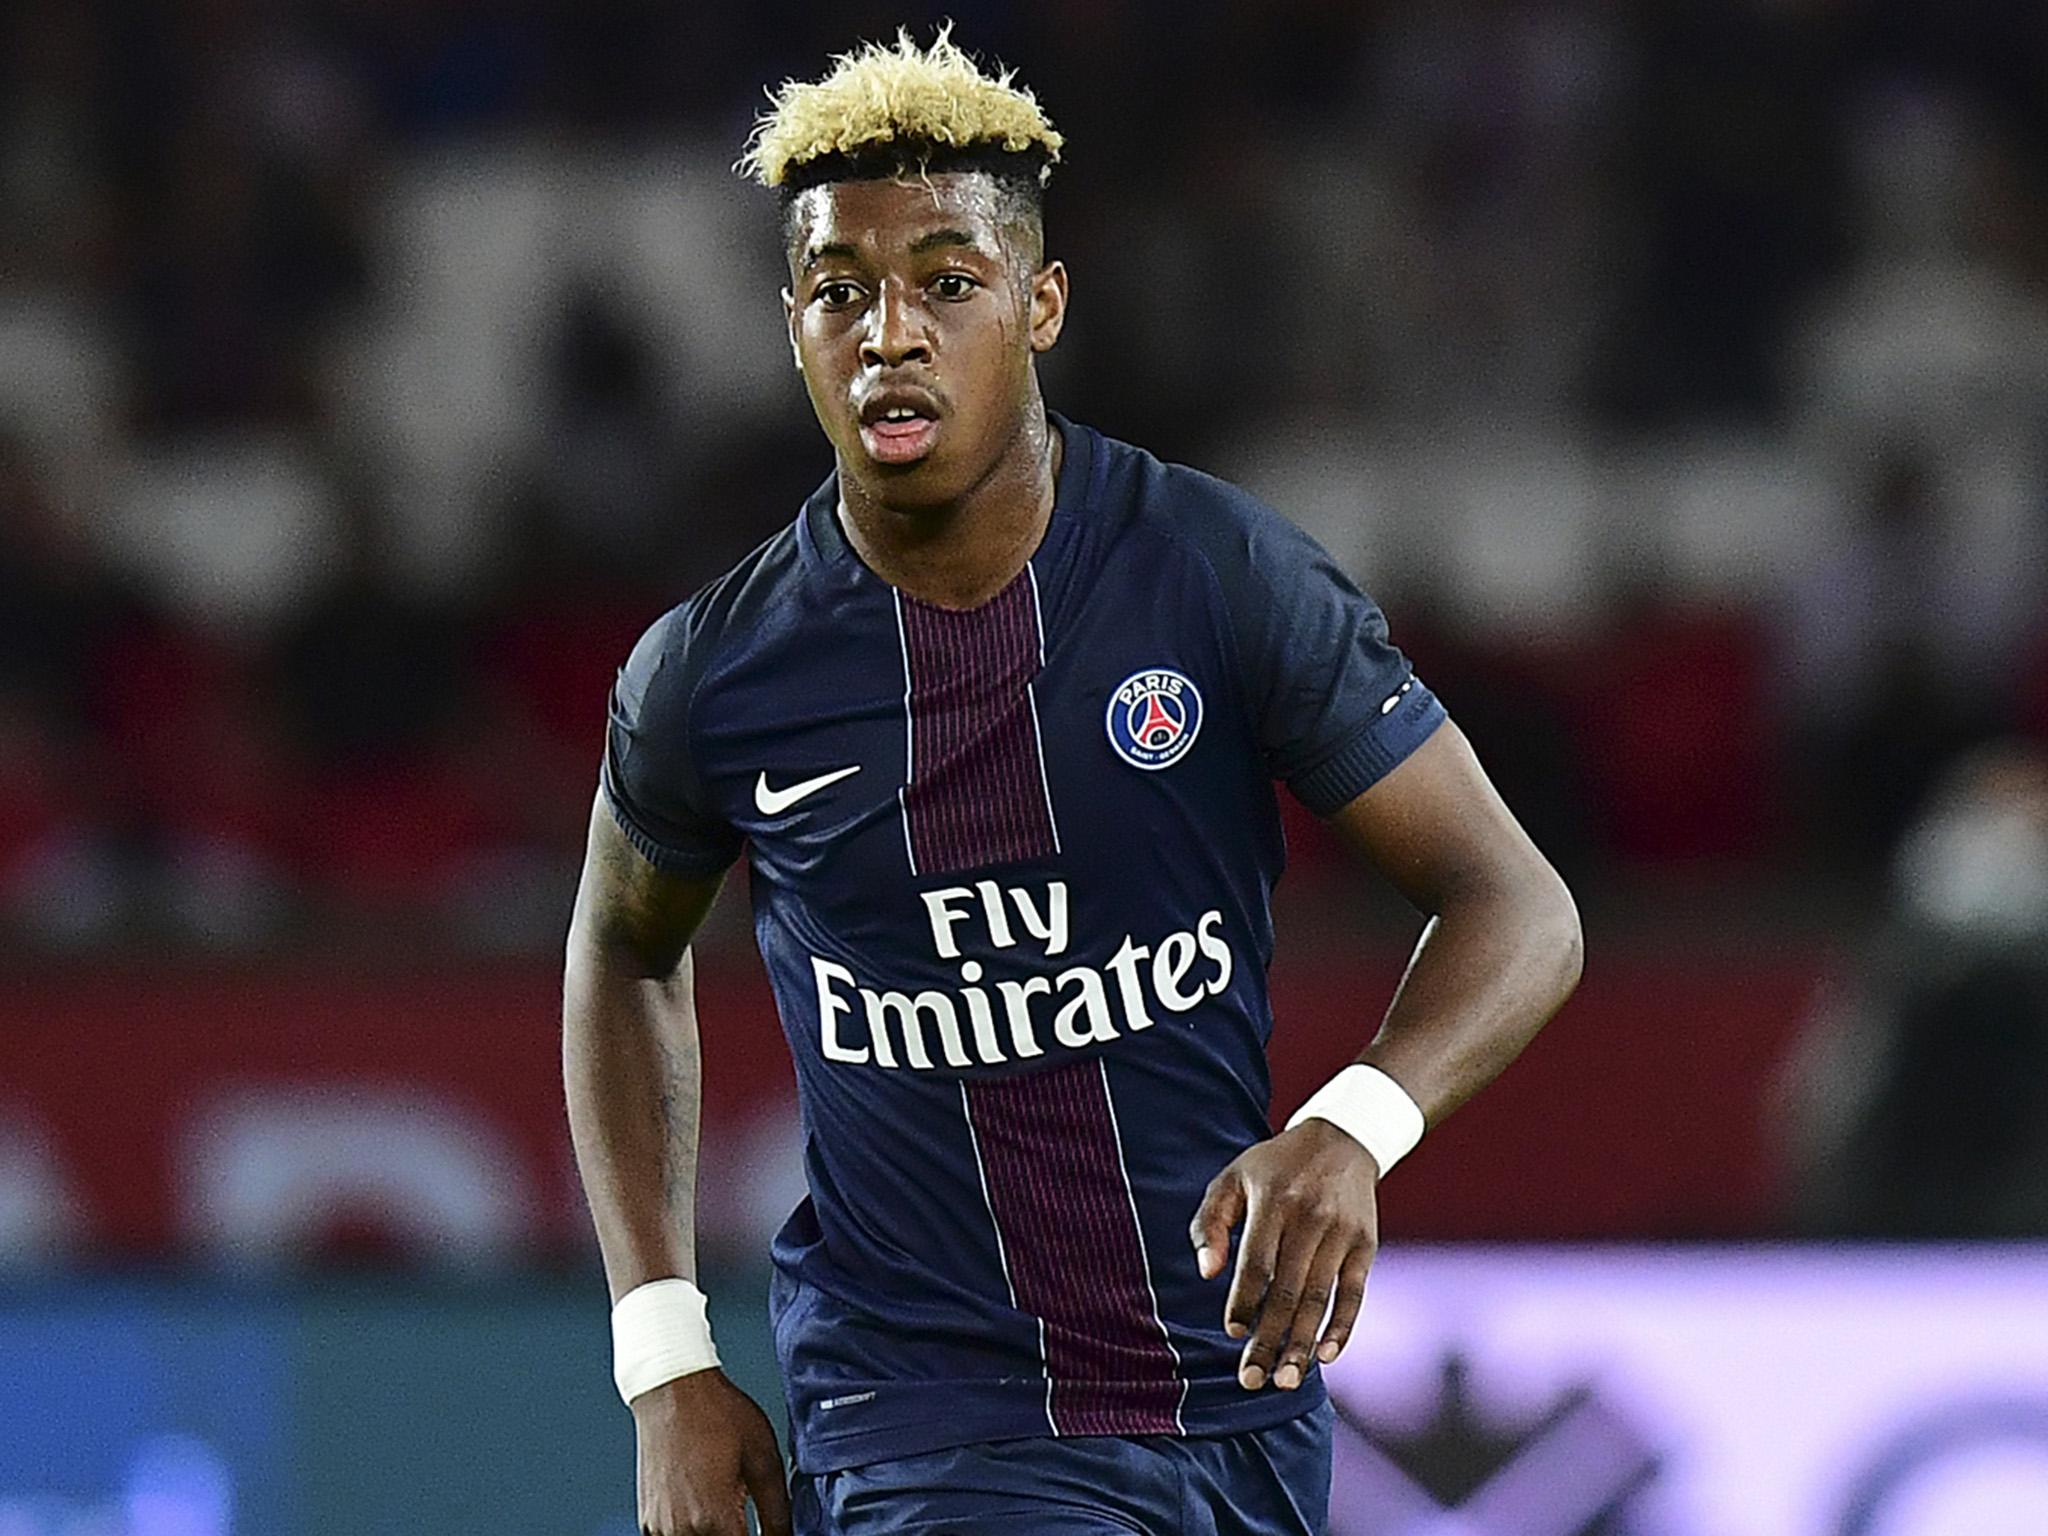 The 21-year-old defender starts at centre-back for PSG